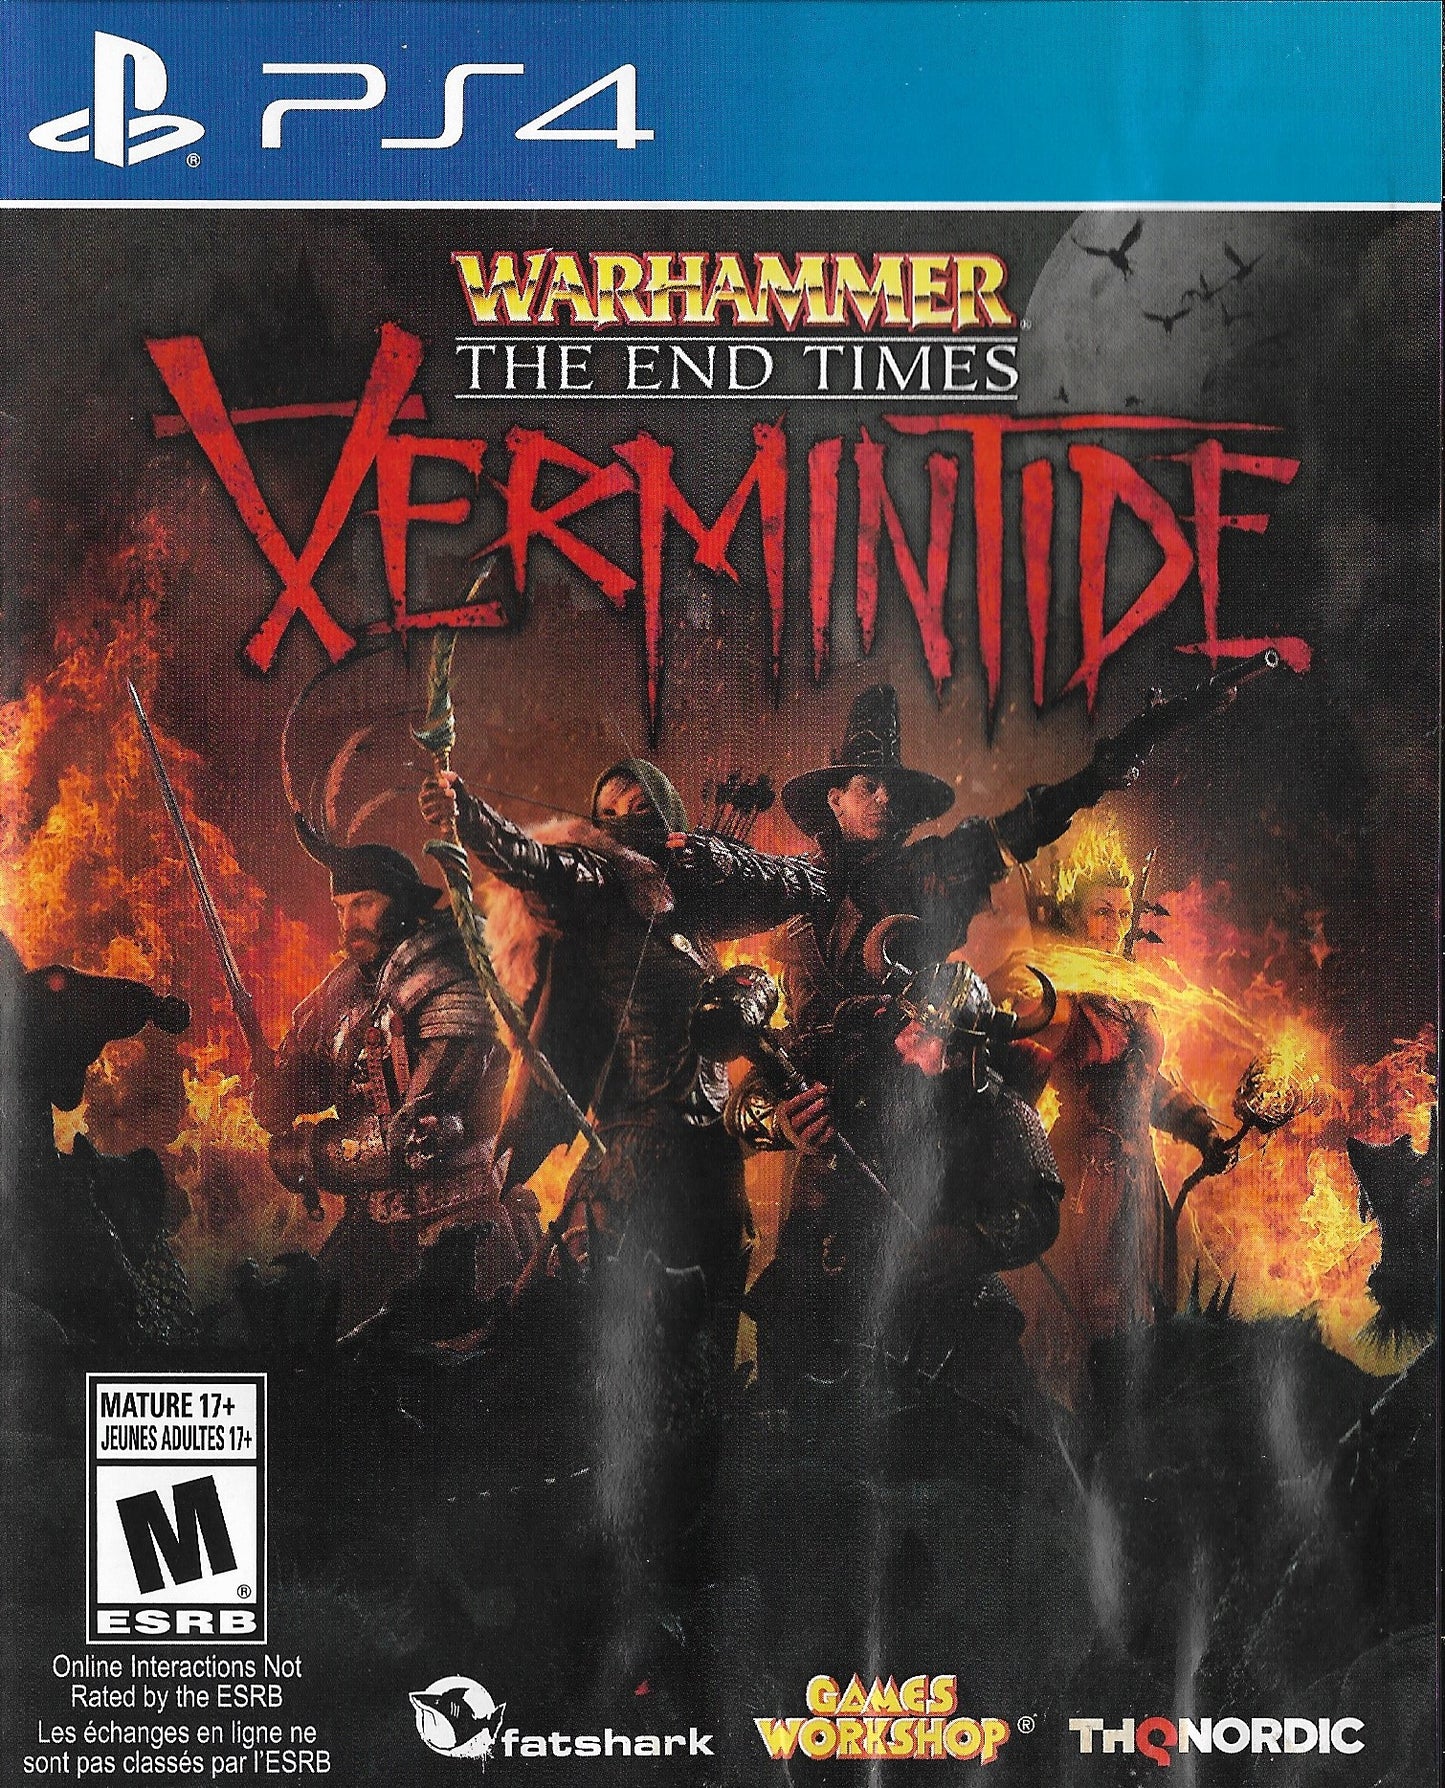 Ps4 Warhammer The End Times Xerminitide